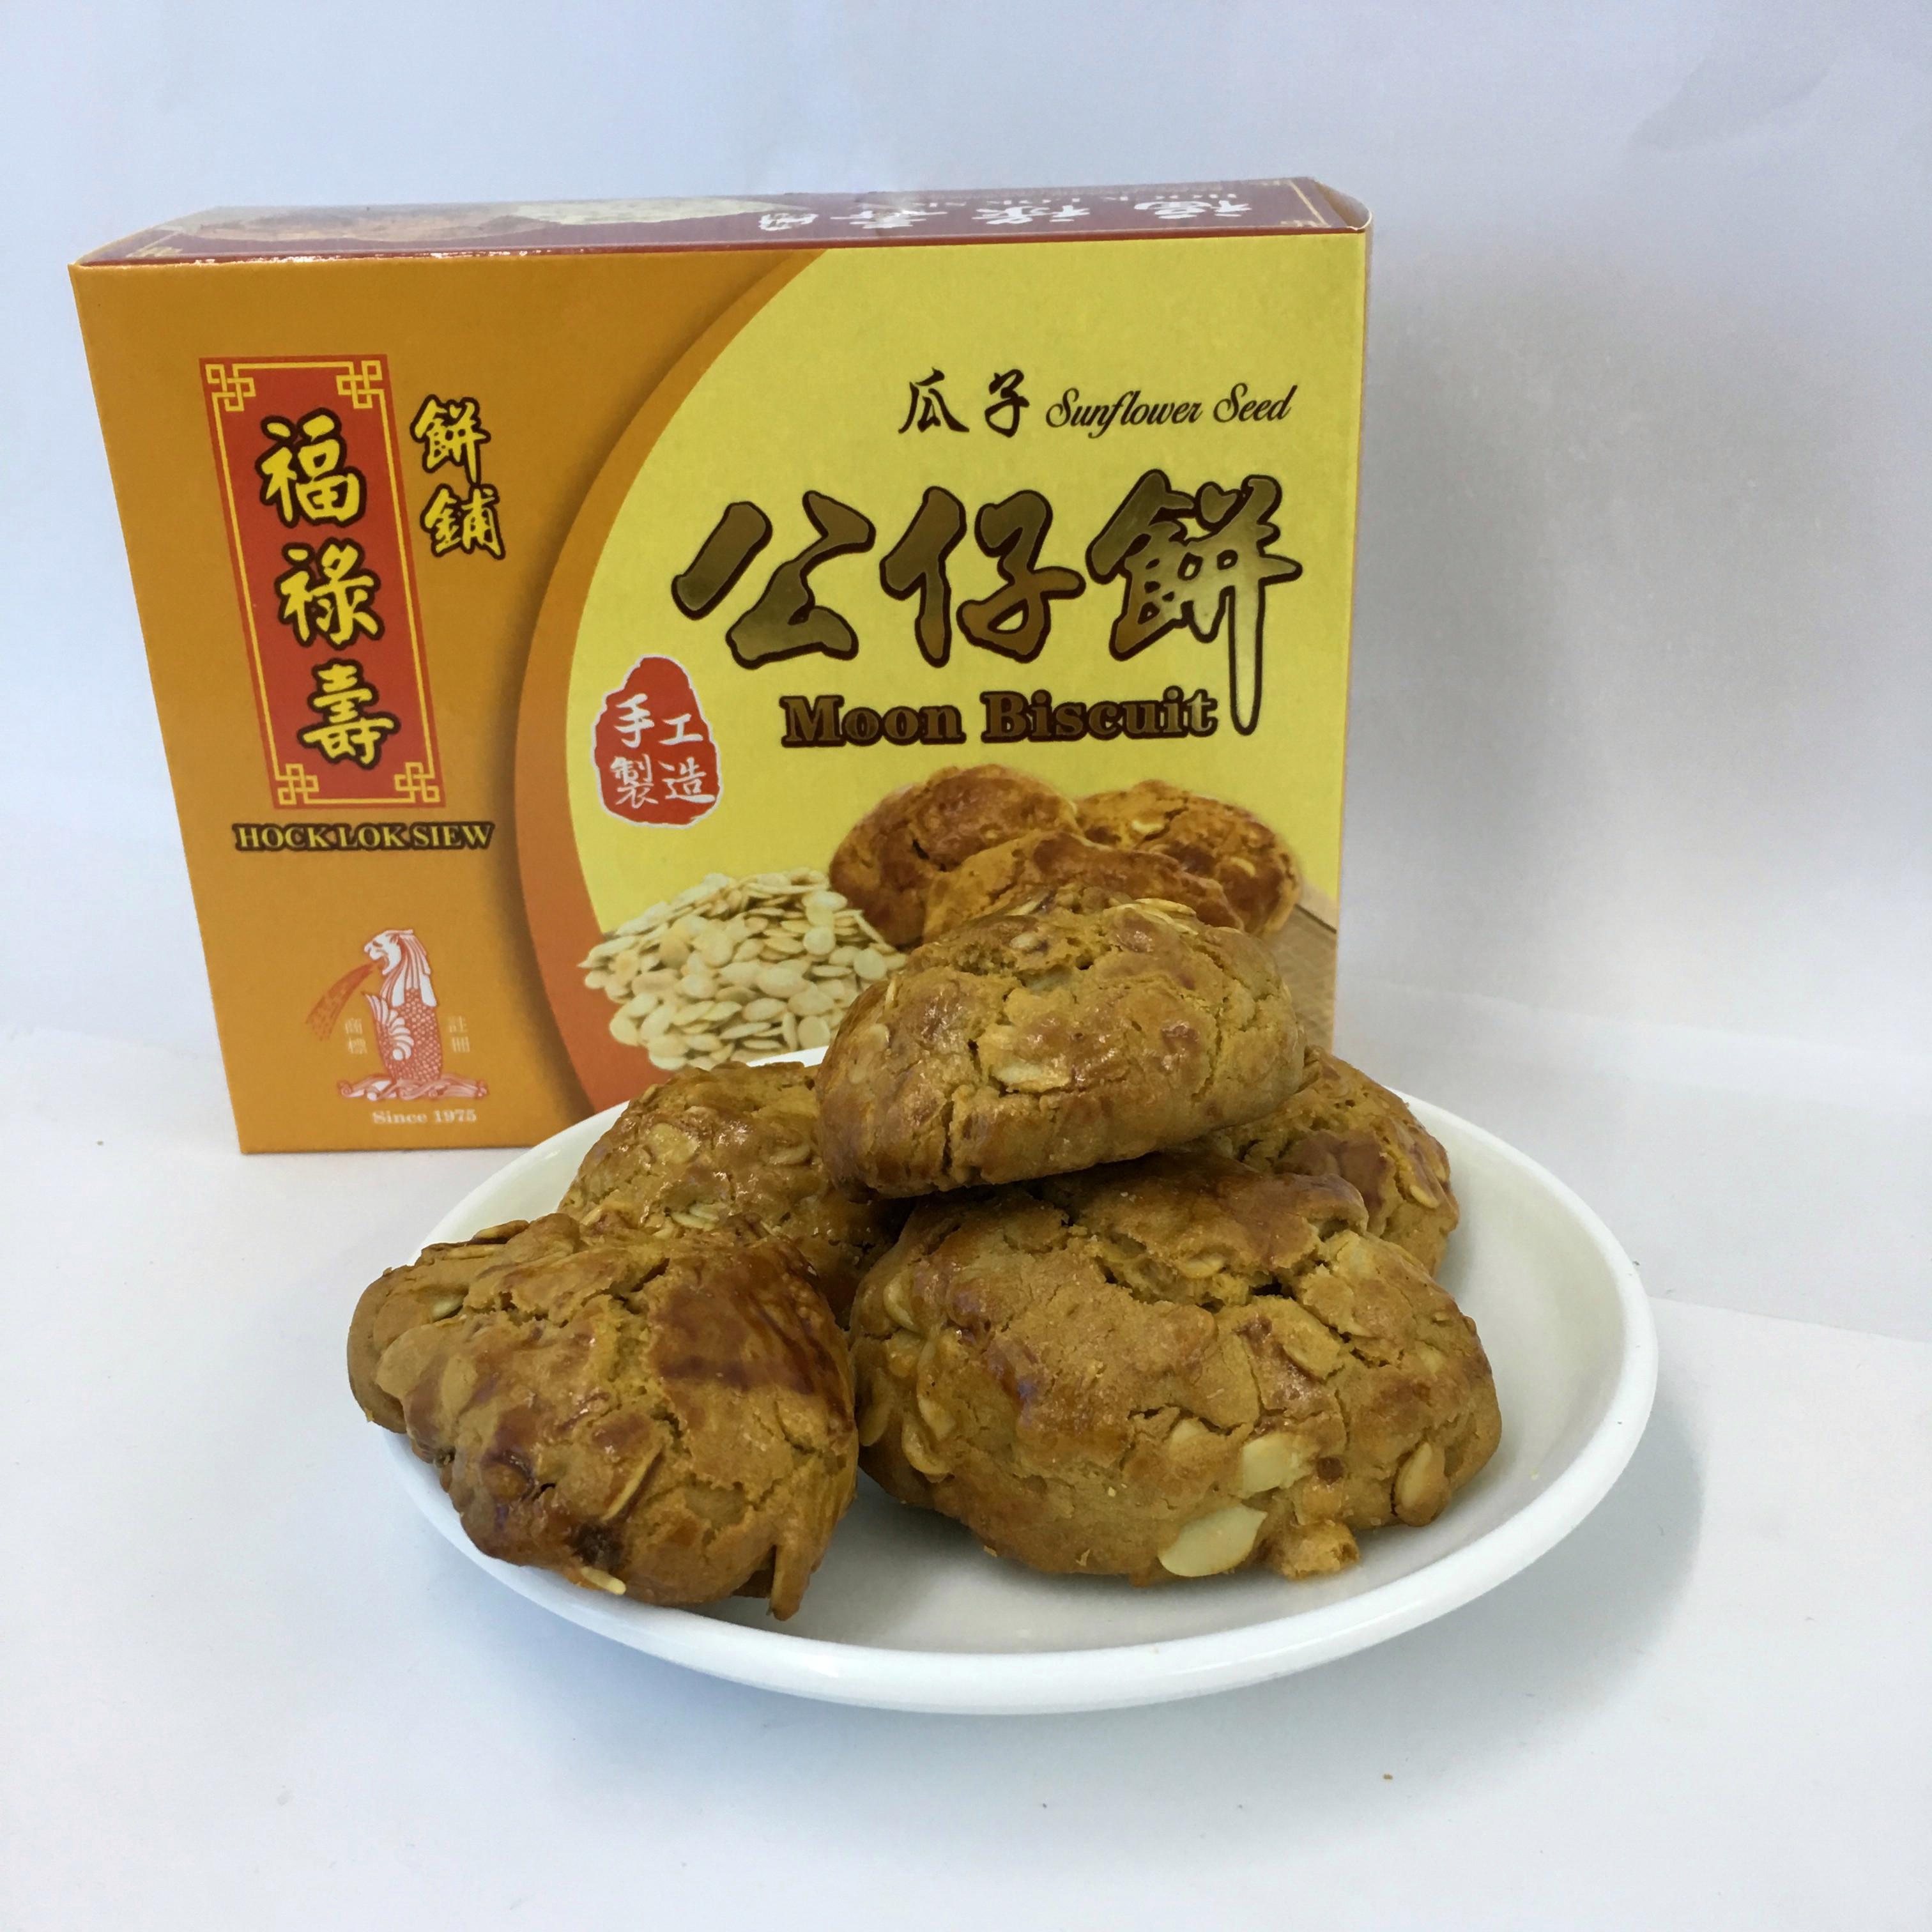 Sunflower Seed Moon Biscuit 瓜子公仔饼